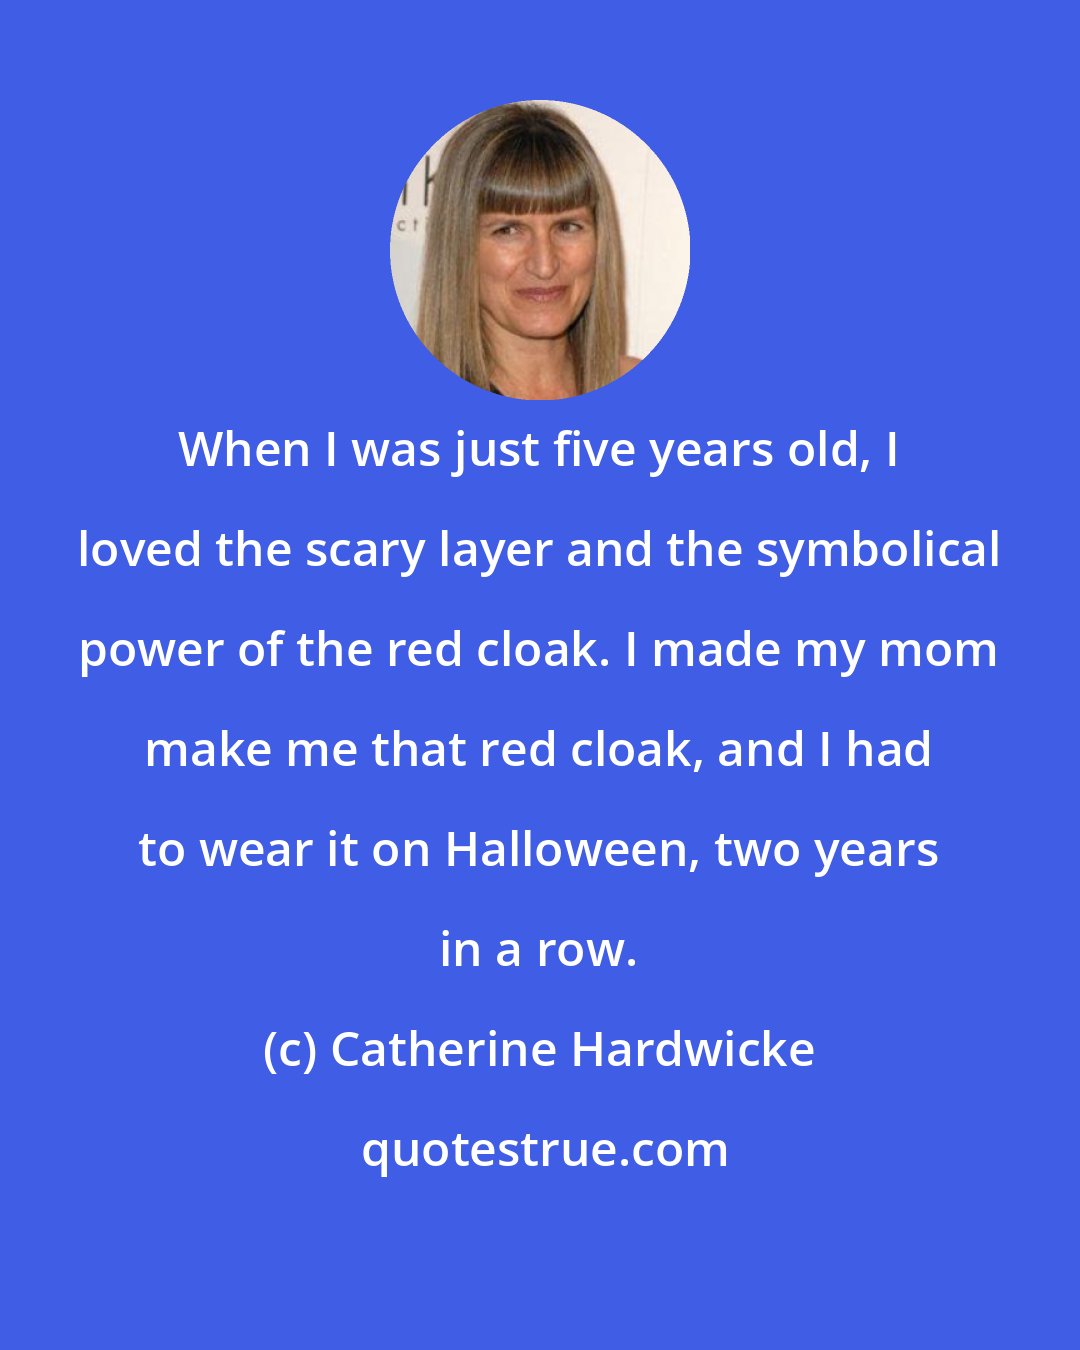 Catherine Hardwicke: When I was just five years old, I loved the scary layer and the symbolical power of the red cloak. I made my mom make me that red cloak, and I had to wear it on Halloween, two years in a row.